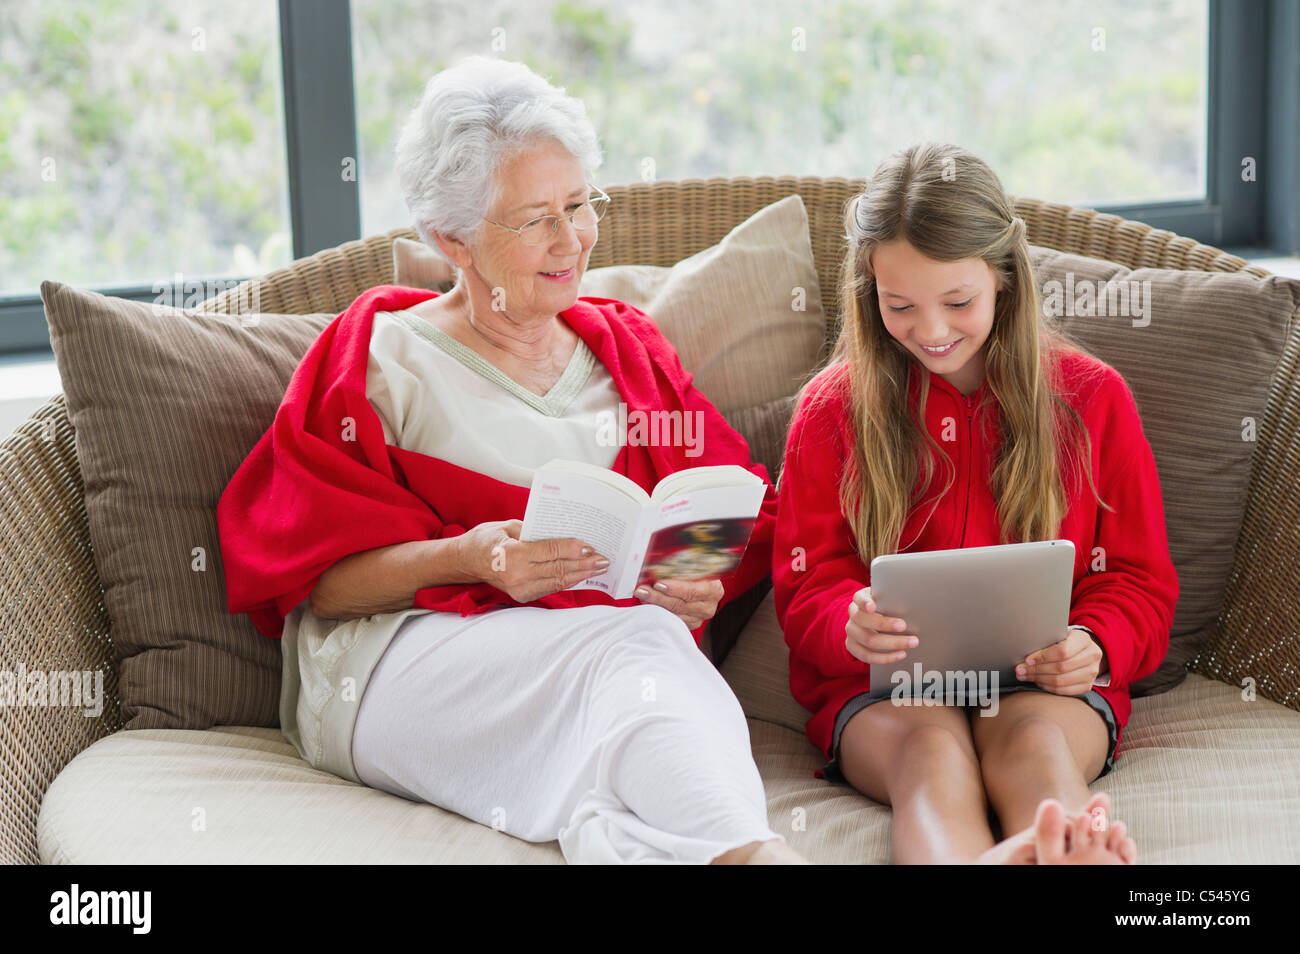 Senior woman reading a magazine with her granddaughter using a digital tablet Stock Photo